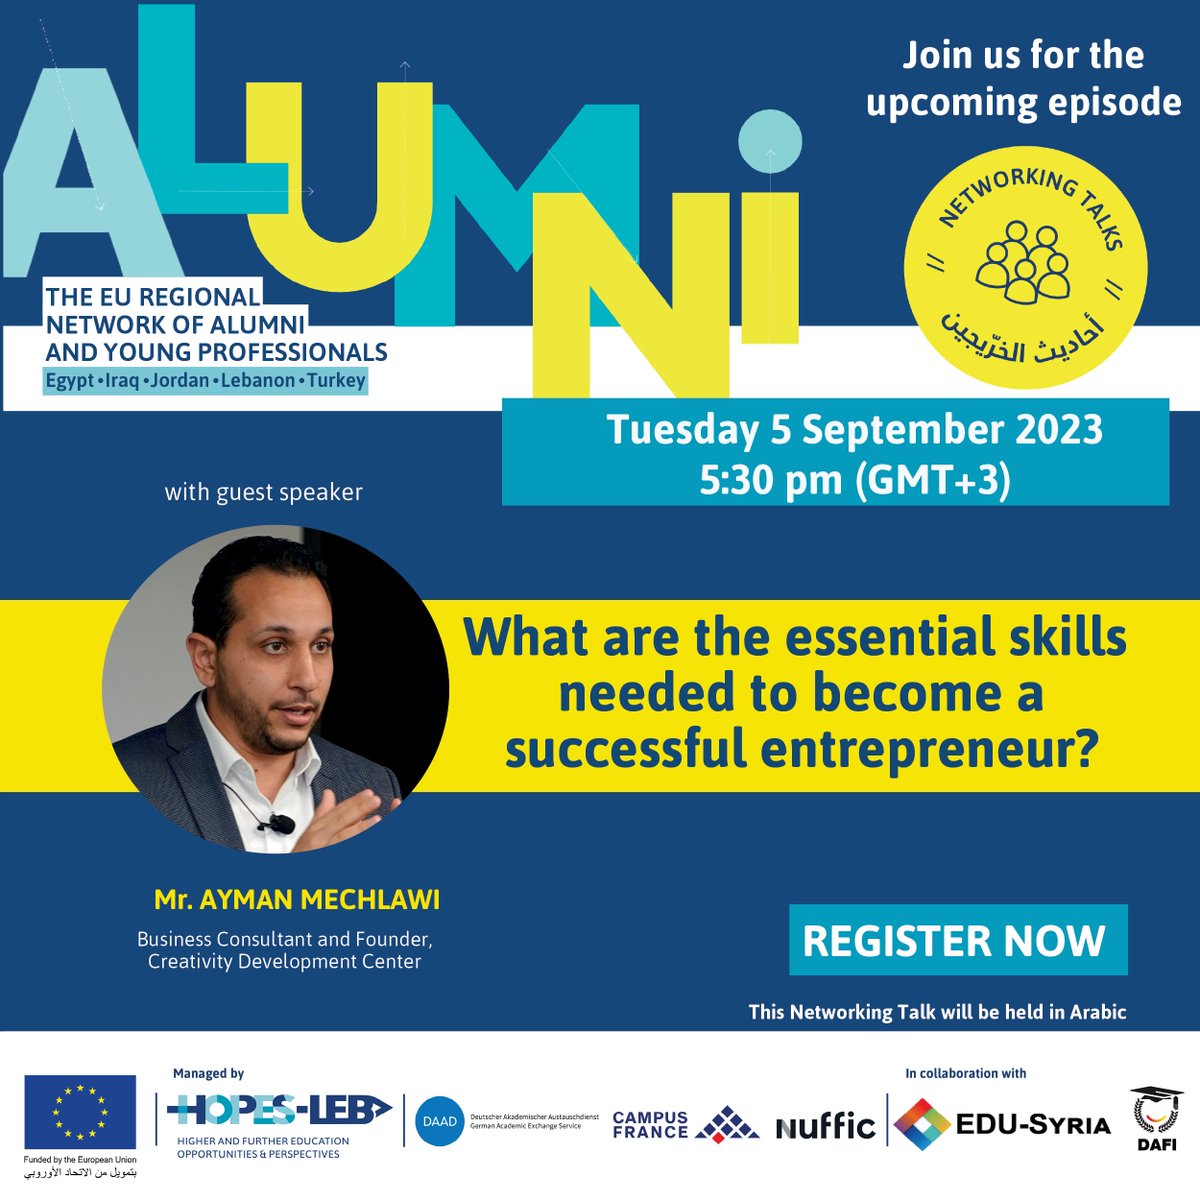 Discover the essential skills needed for a successful entrepreneur in the next Networking Talks with the Business Consultant and Founder of Creativity Development Center, Mr. Ayman Mechlawi on September 5, at 5:30pm (GMT+3). Register for free: framaforms.org/stmr-ltsjyl-fy…